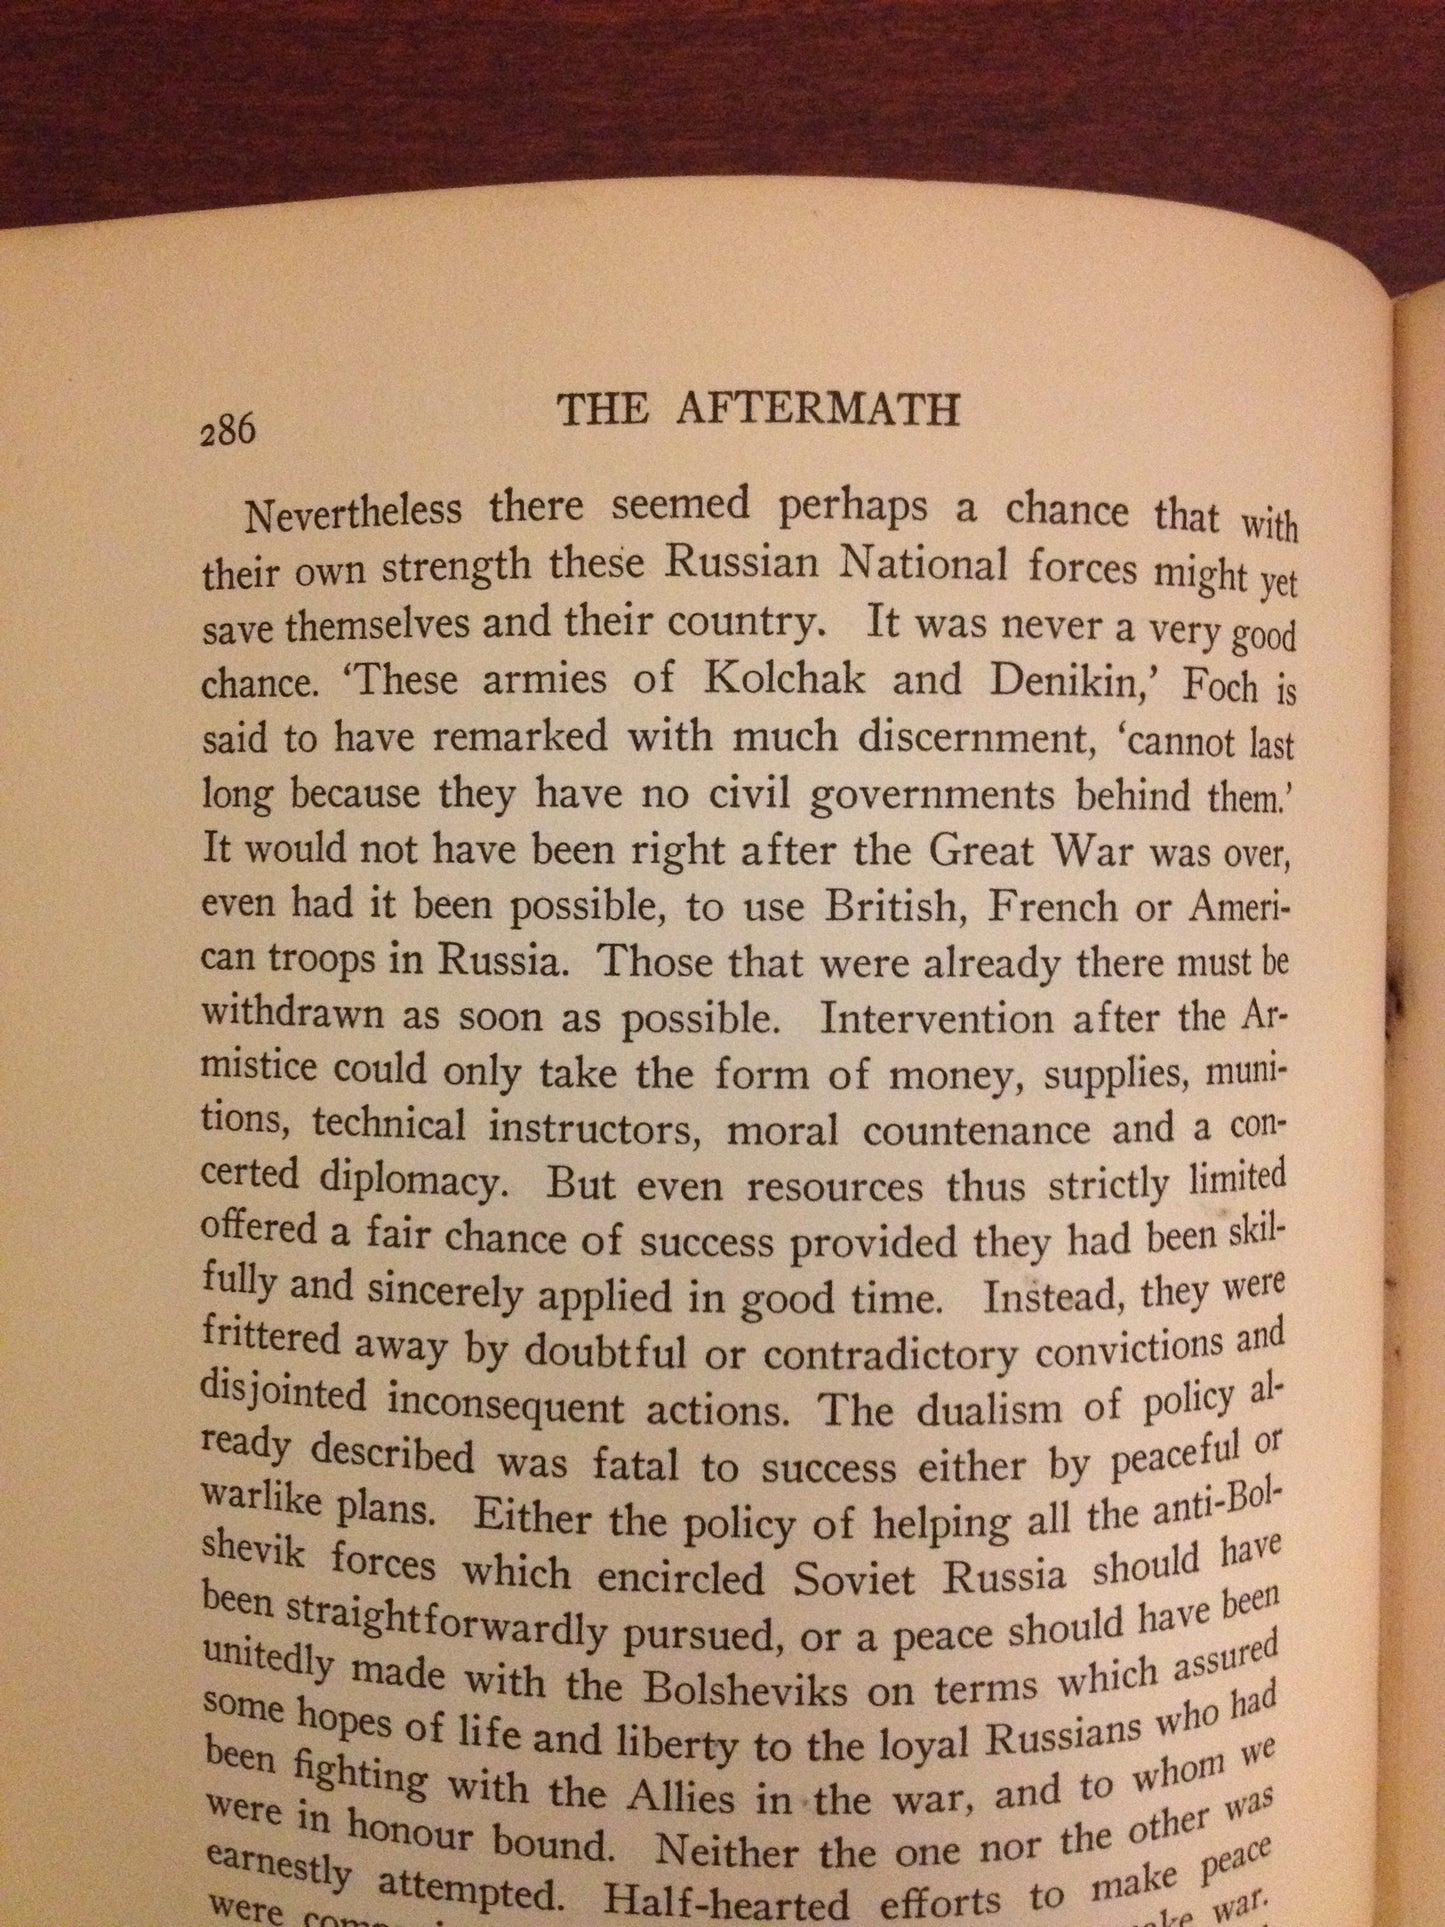 THE AFTERMATH  BY: THE RIGHT HON. WINSTON S. CHURCHILL